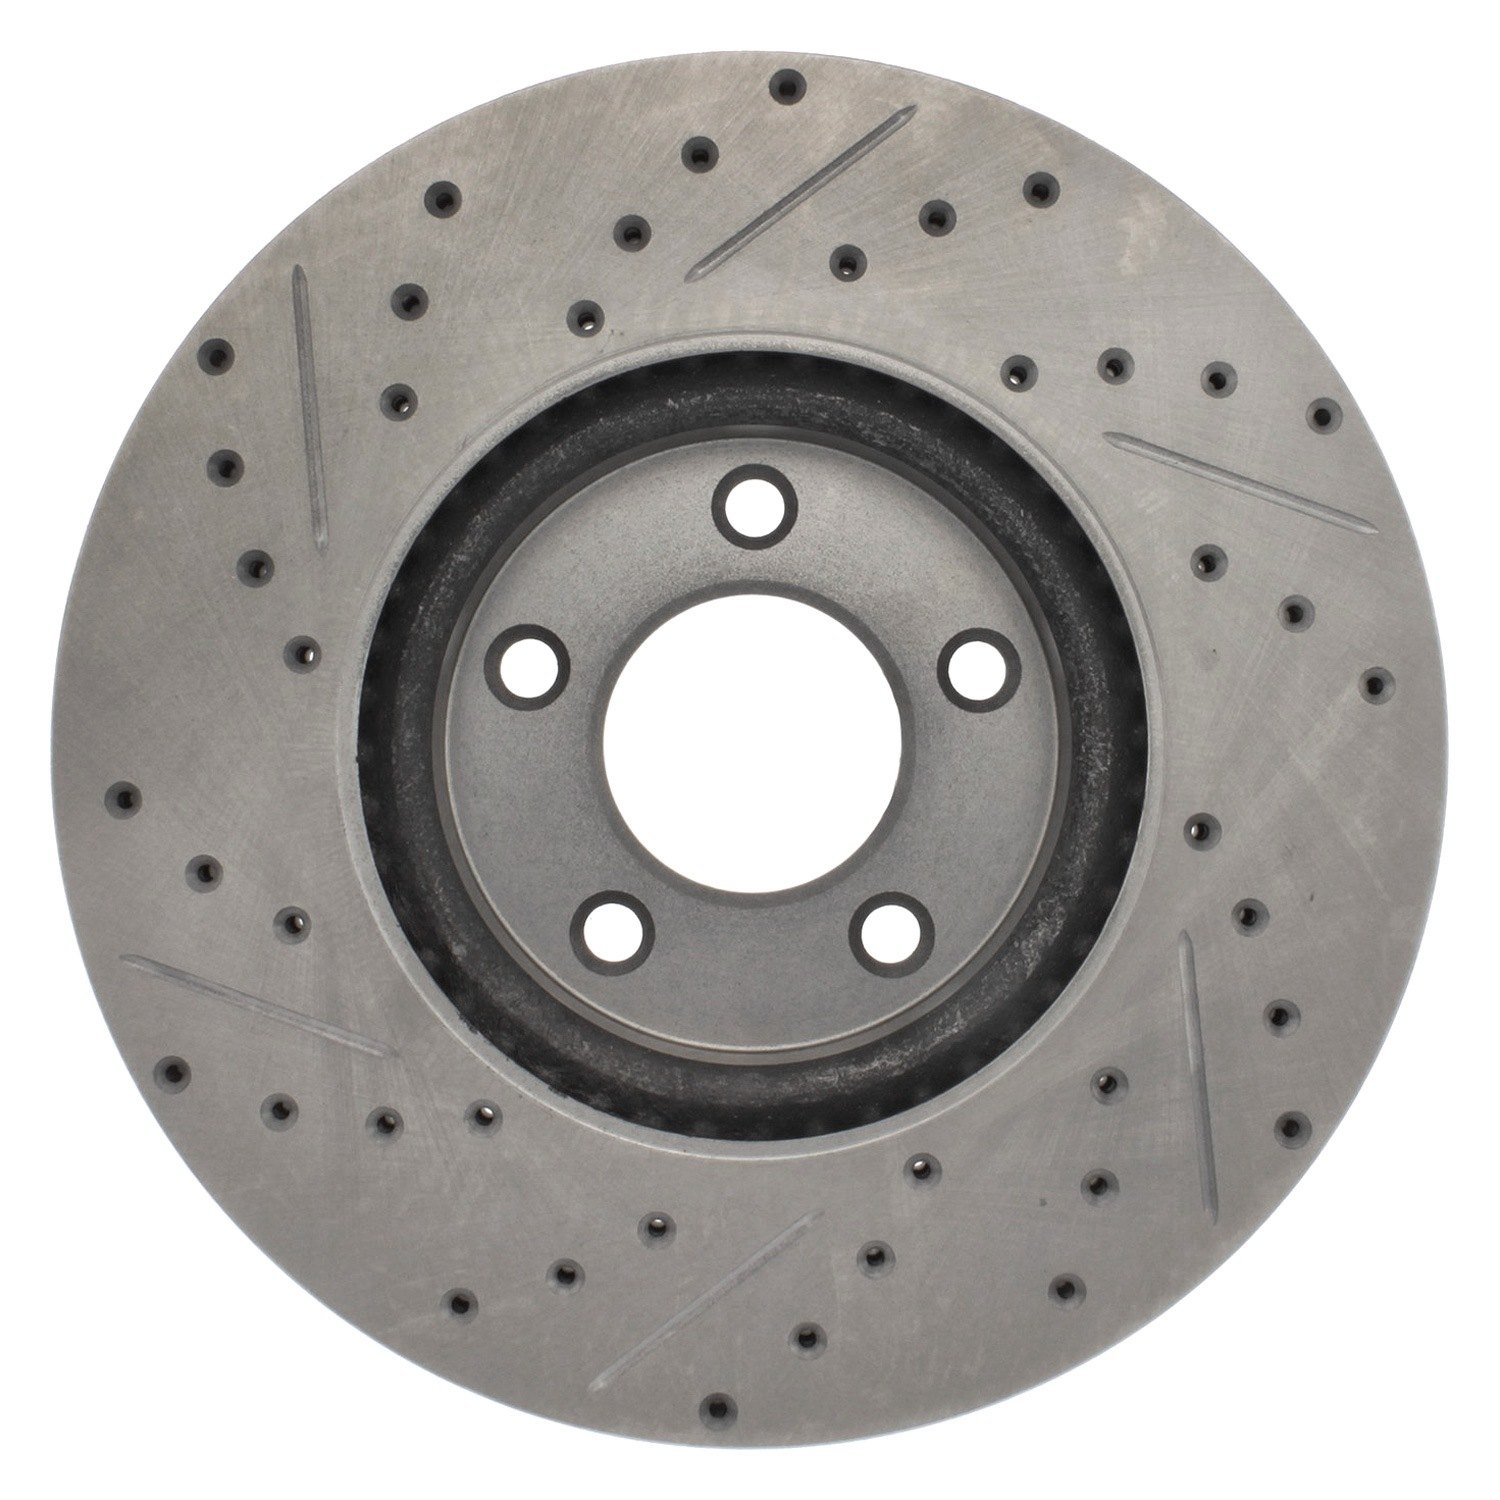 For Mazda 3 07-13 Brake Rotor Select Sport Drilled & Slotted 1-Piece